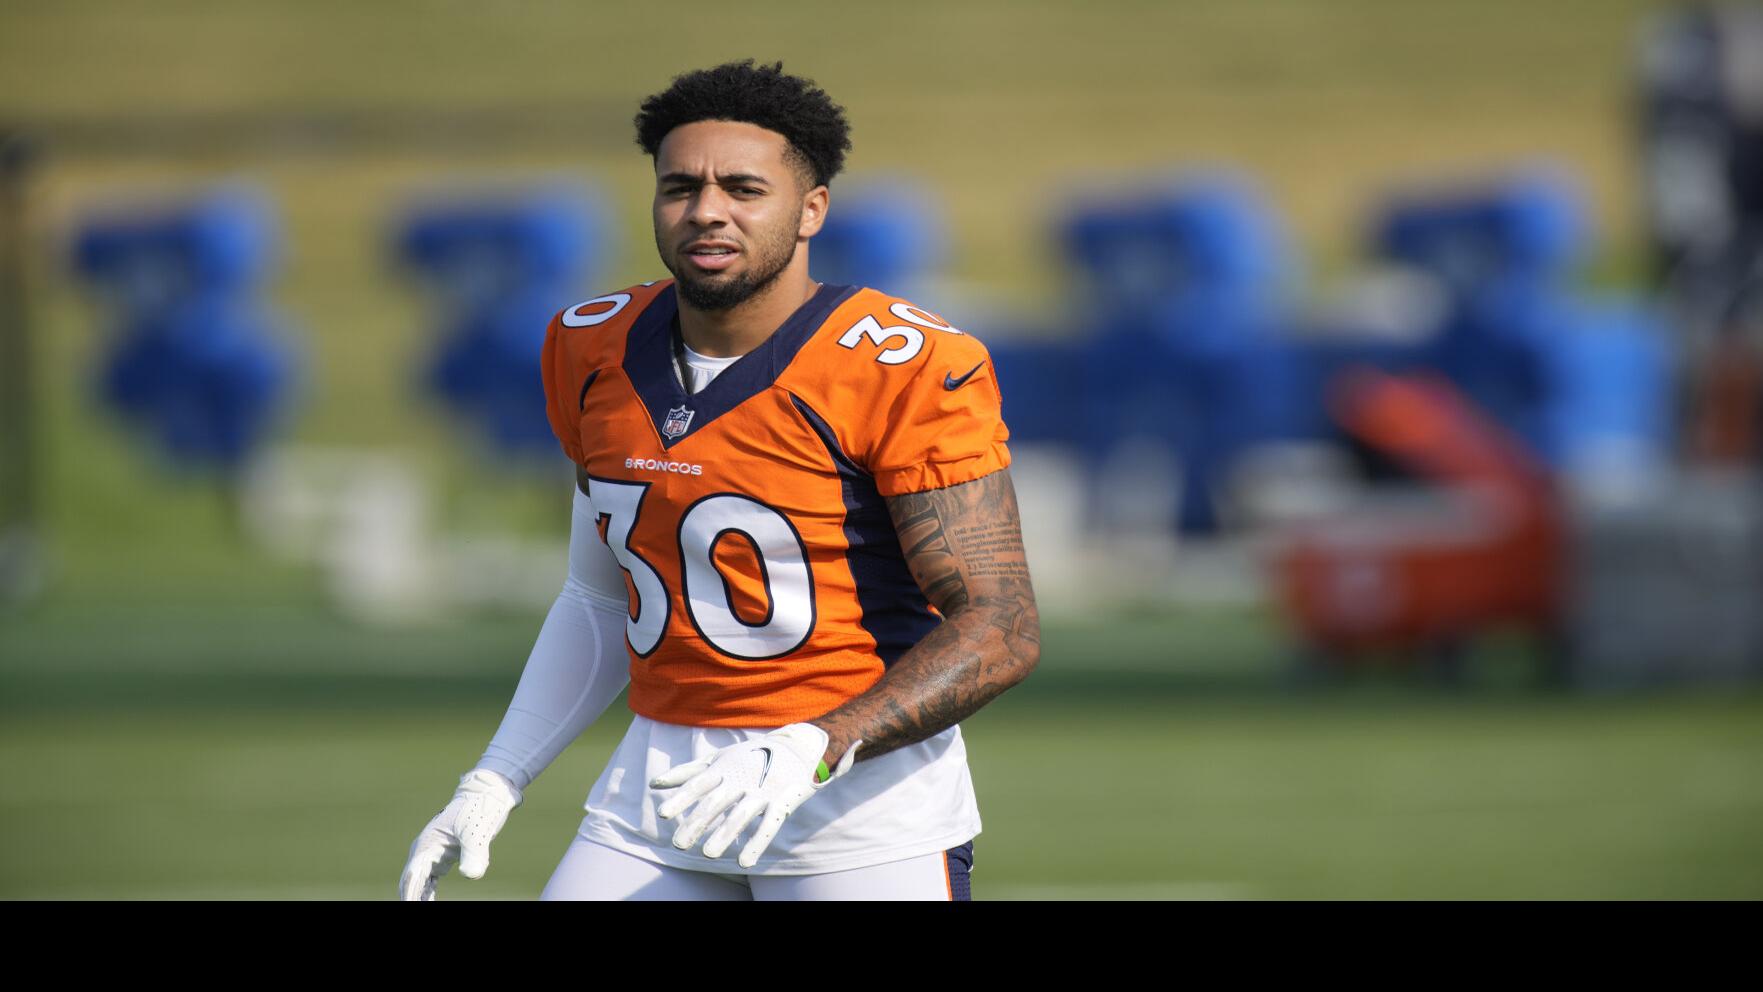 Will Caden Sterns be a steal for the Broncos? - Mile High Report